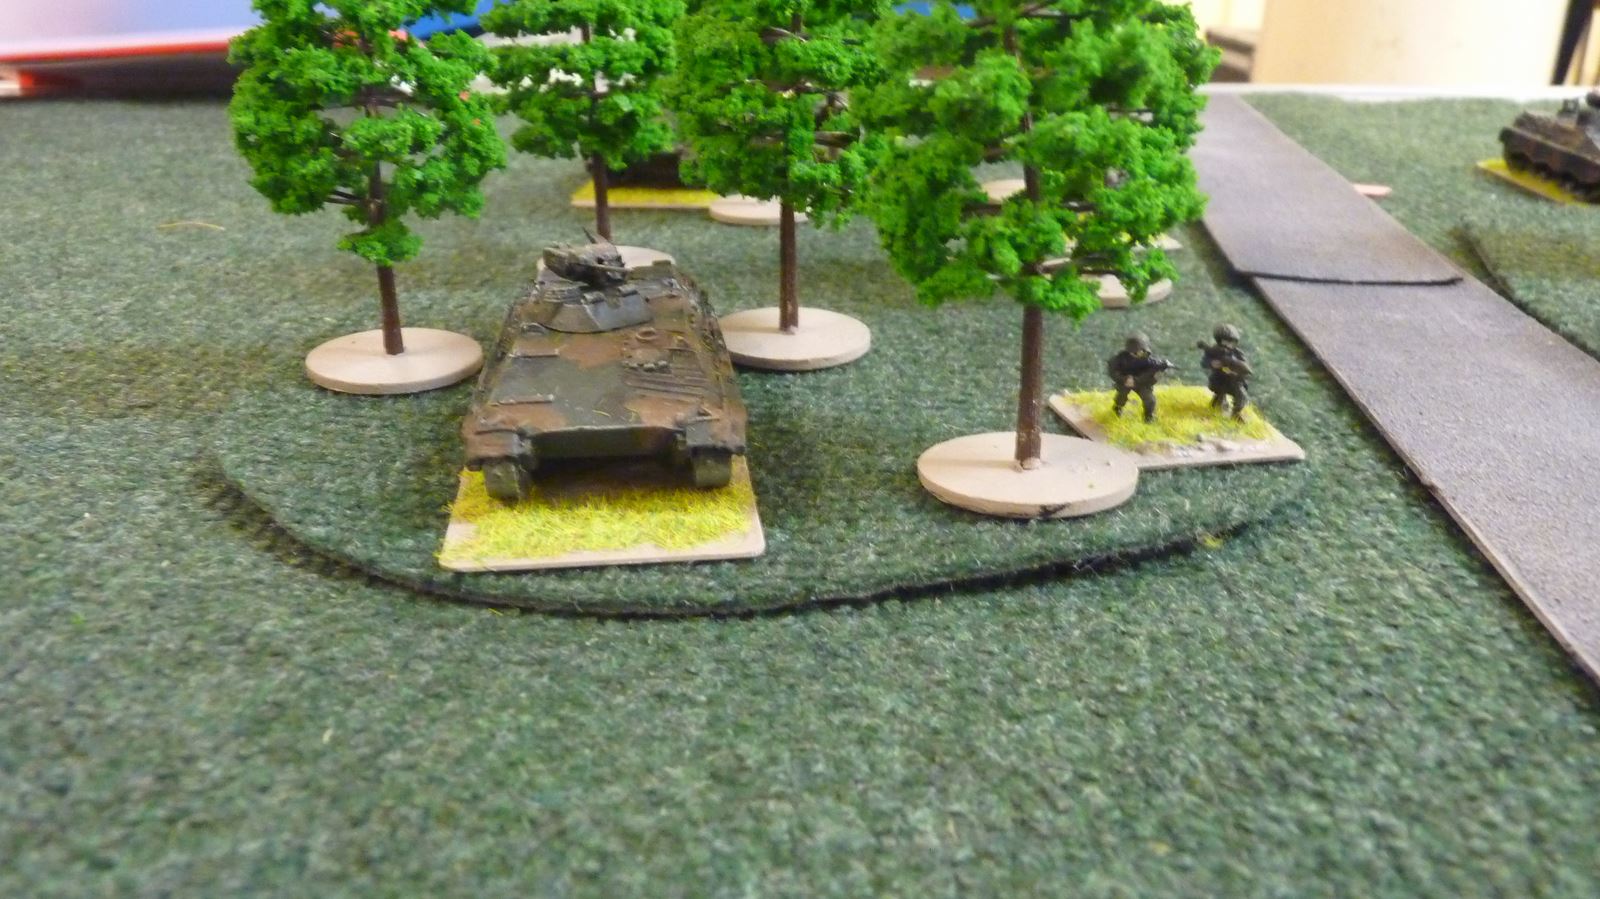 A Marder fires from its hiding place in the wood=